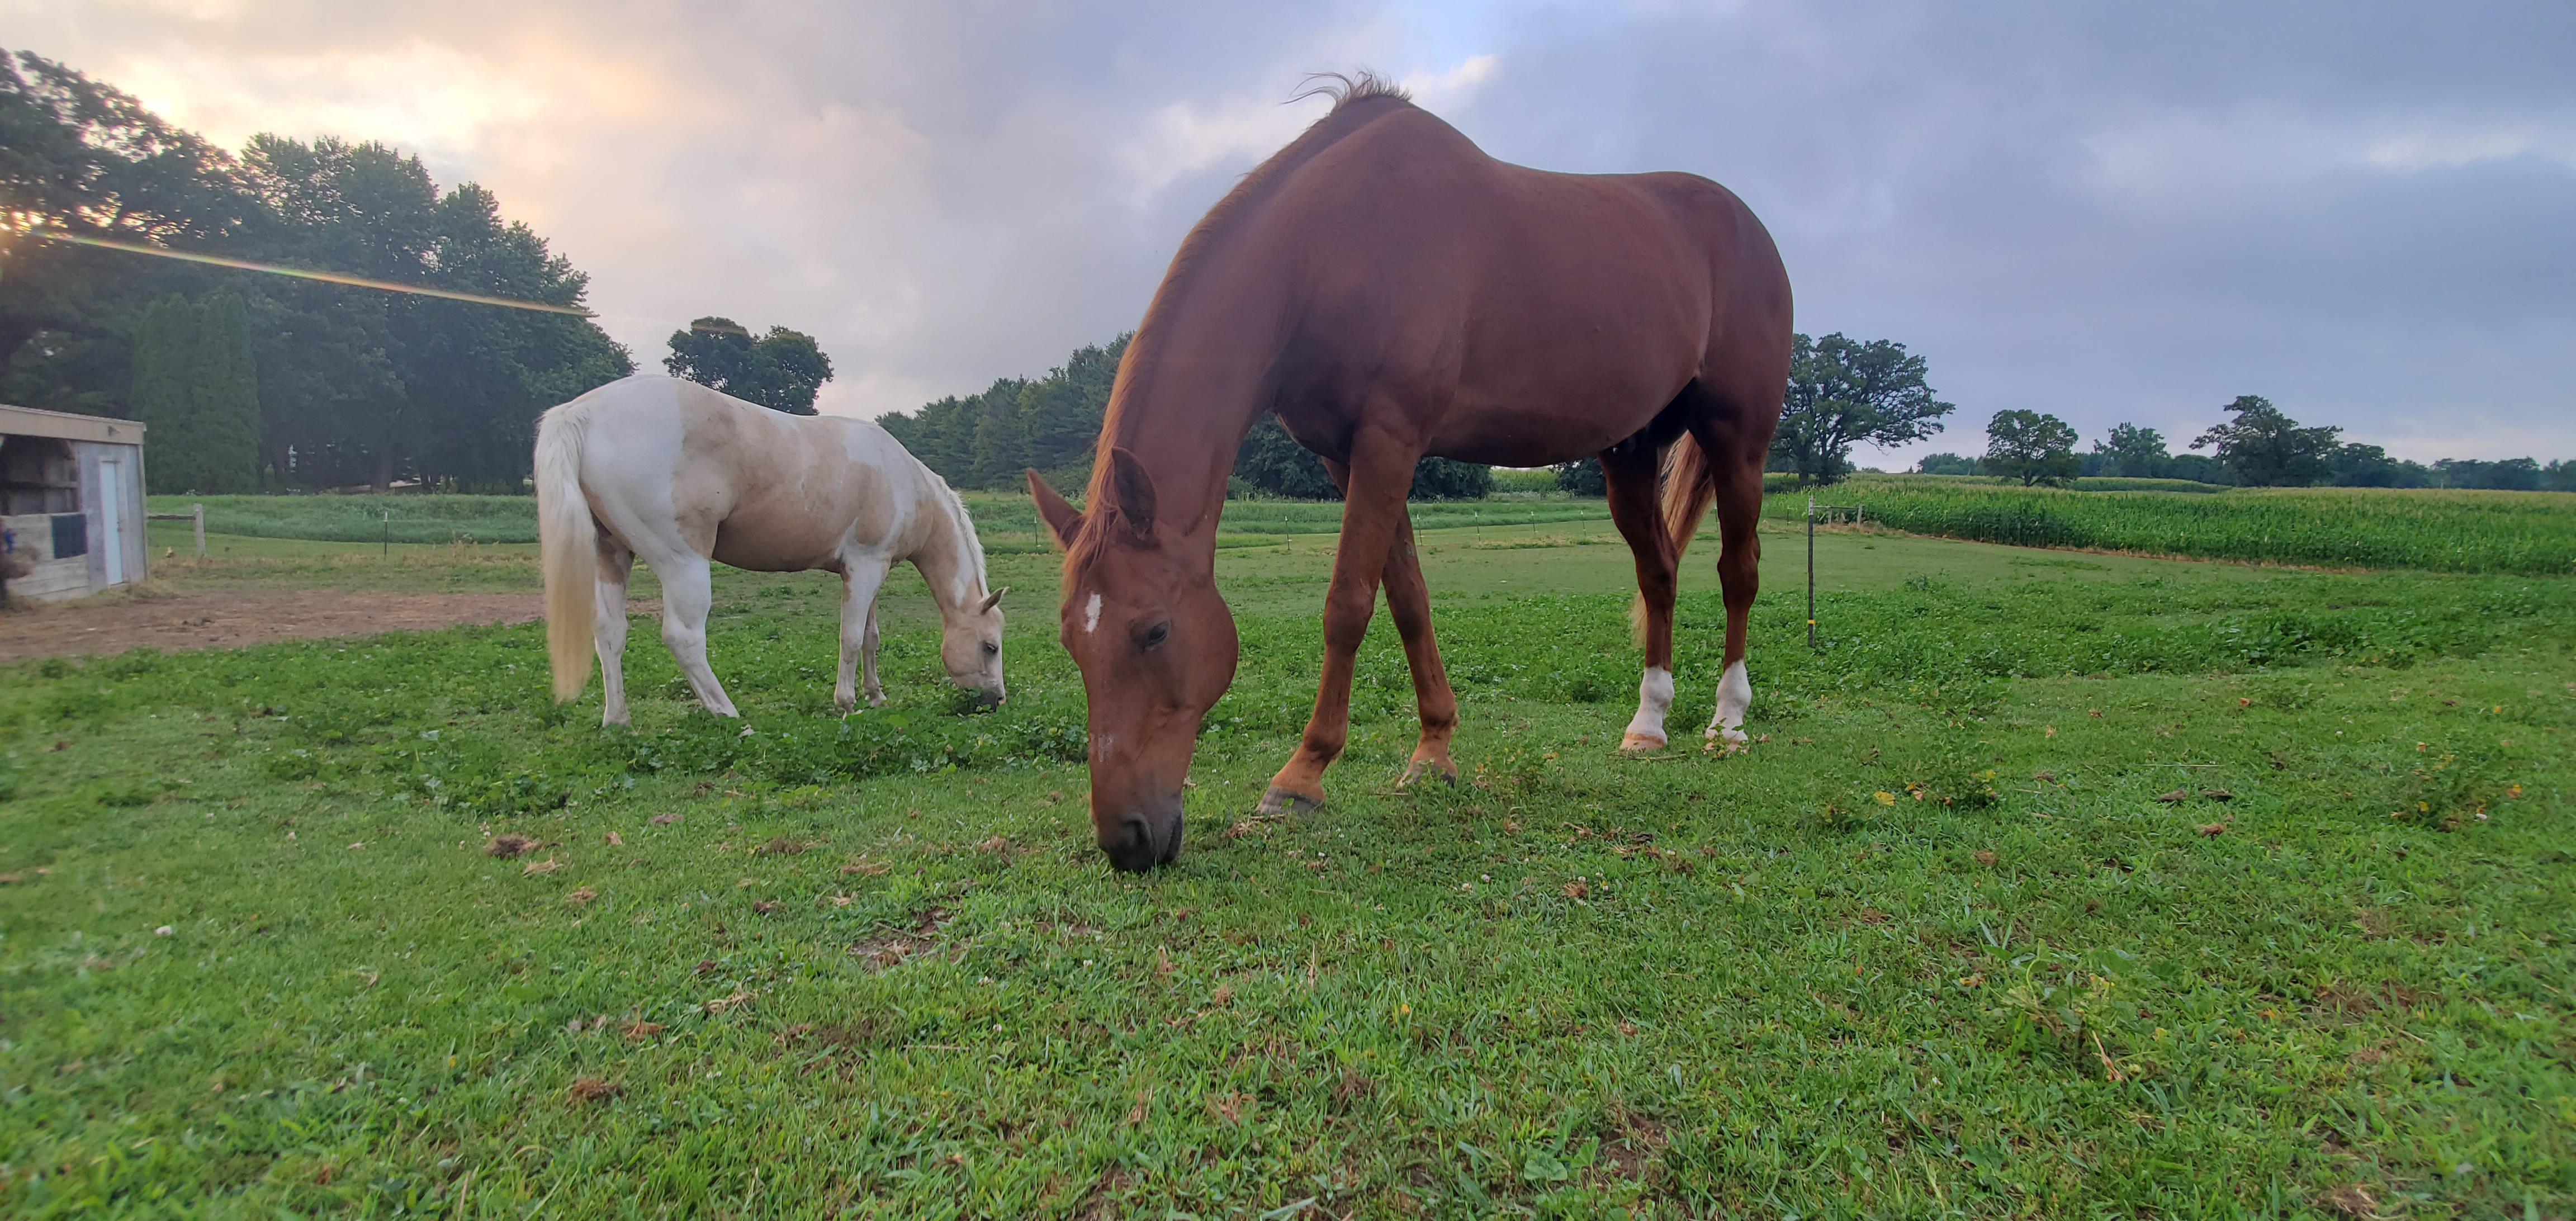 A chestnut gelding and a palomino overo gelding grazing peacefully beside eachother.